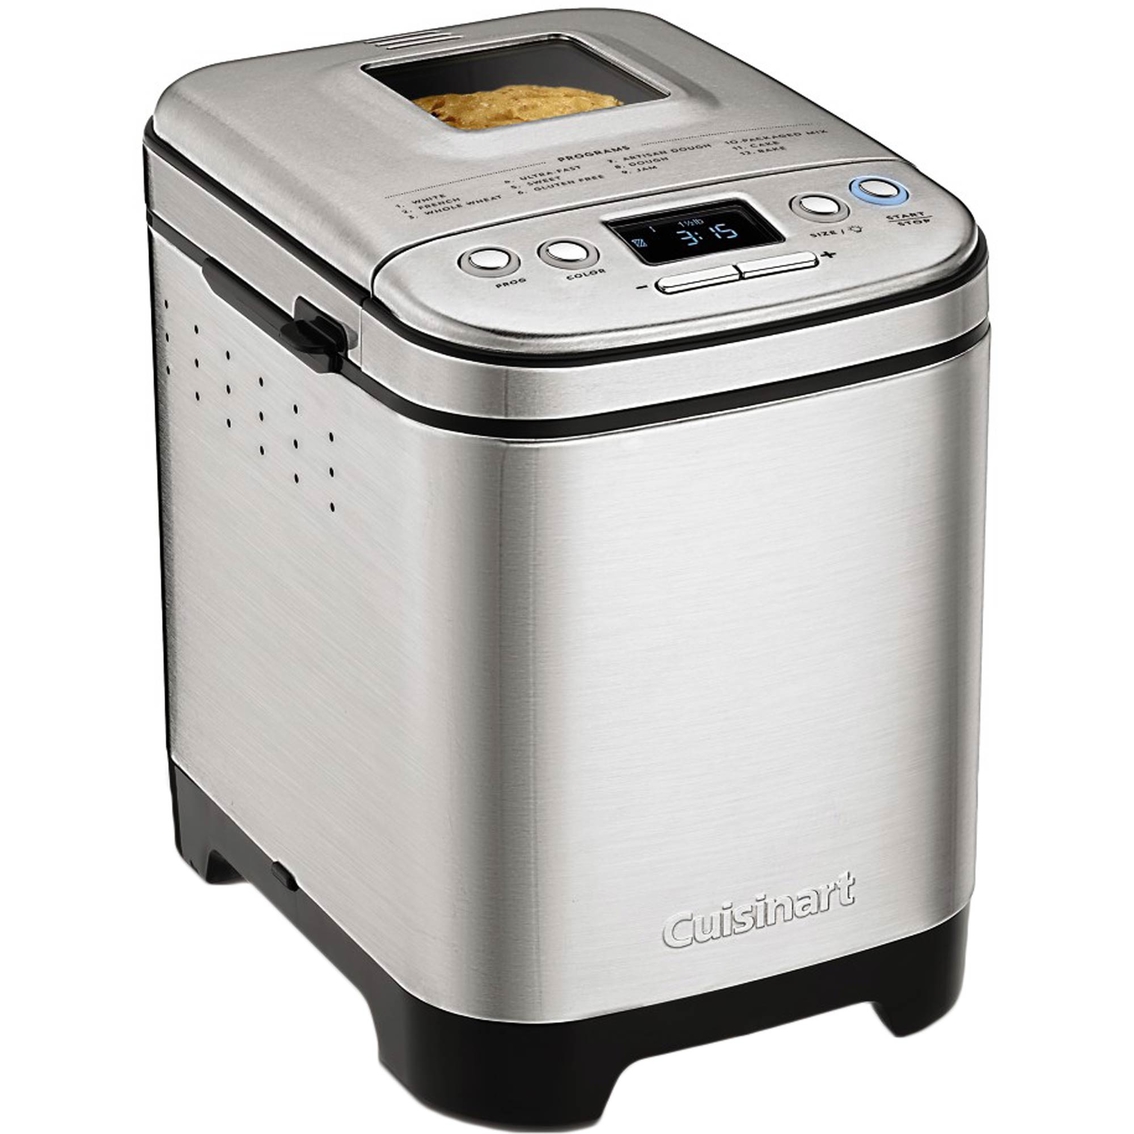 Cuisinart Compact Automatic Bread Maker - Image 2 of 4